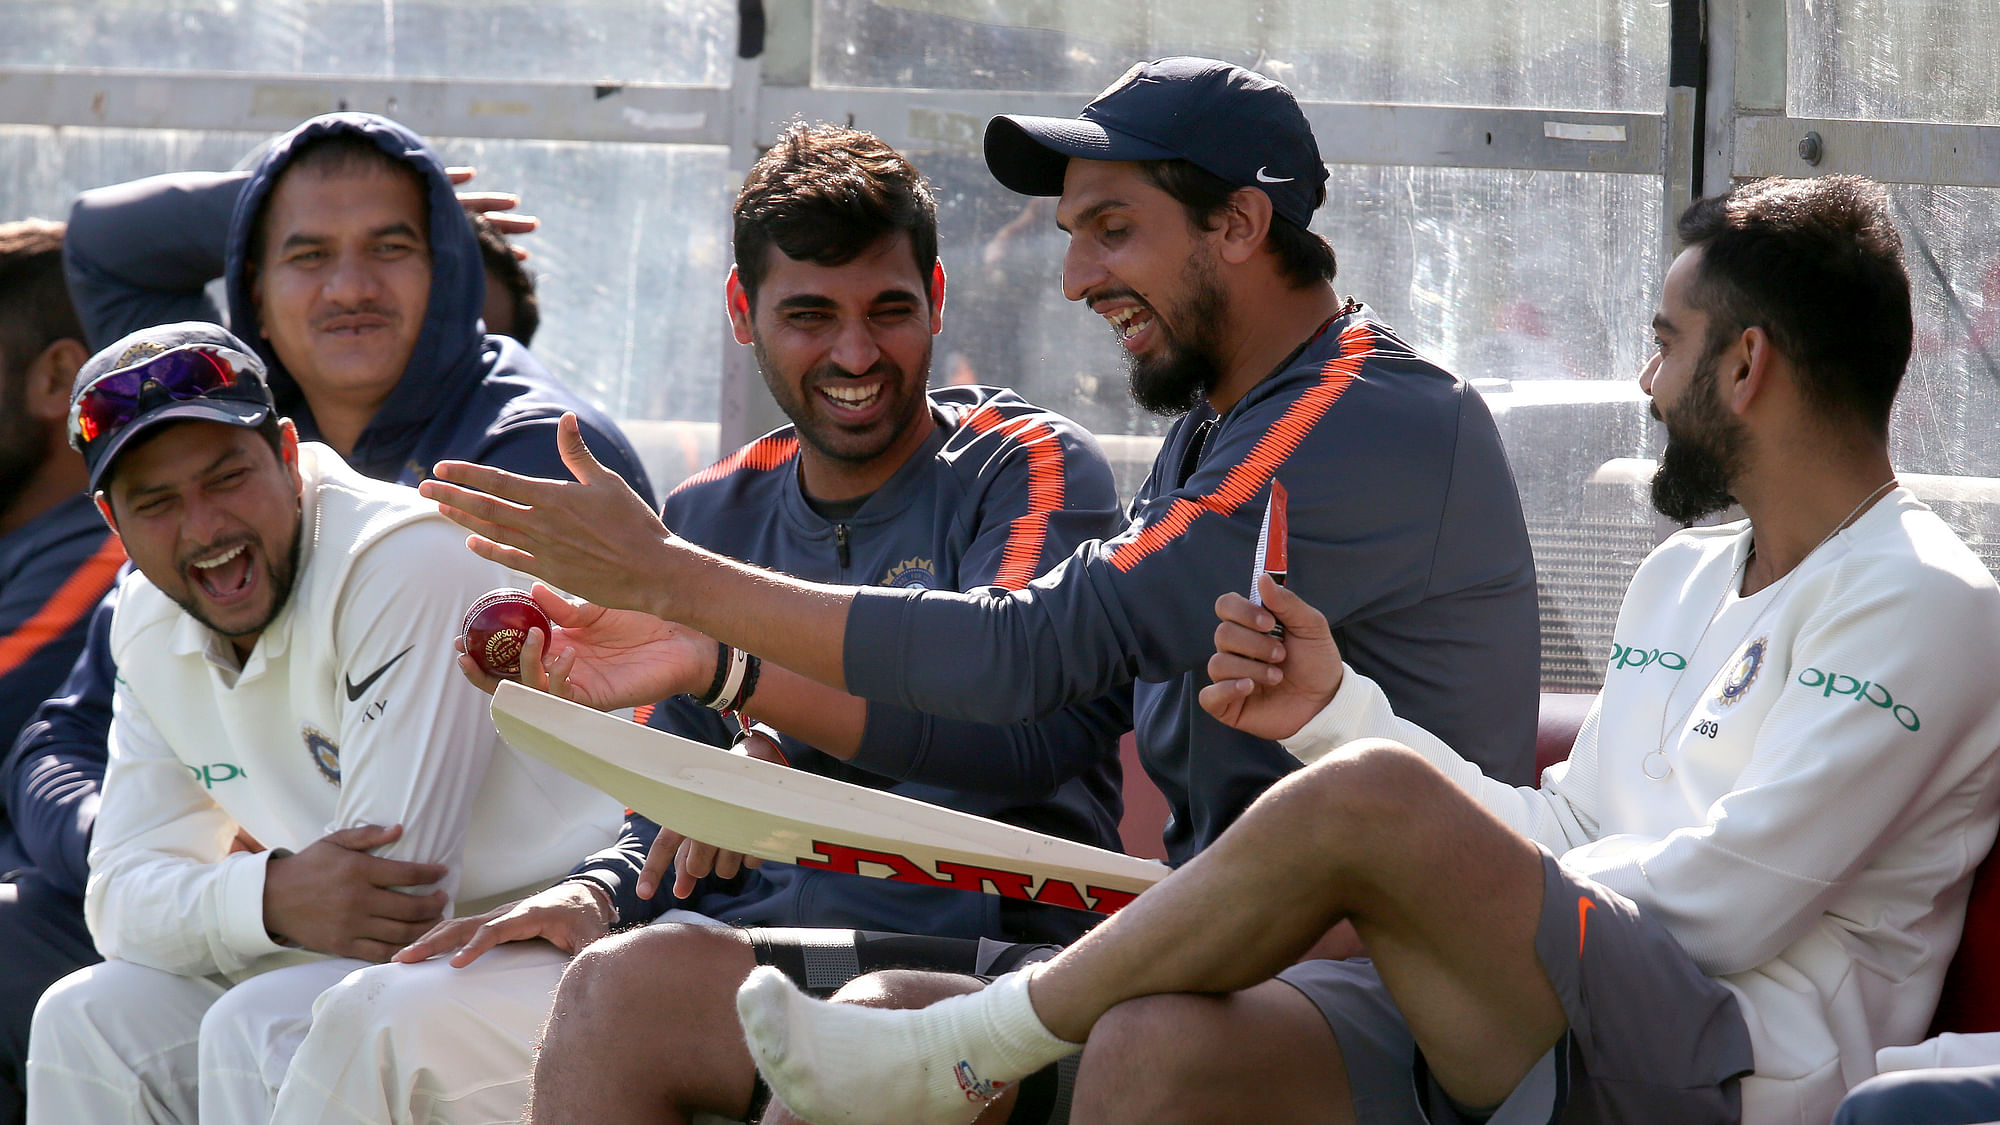 Indian cricketers enjoy a light moment in the dugout during a warm-up game between India and Cricket Australia XI.